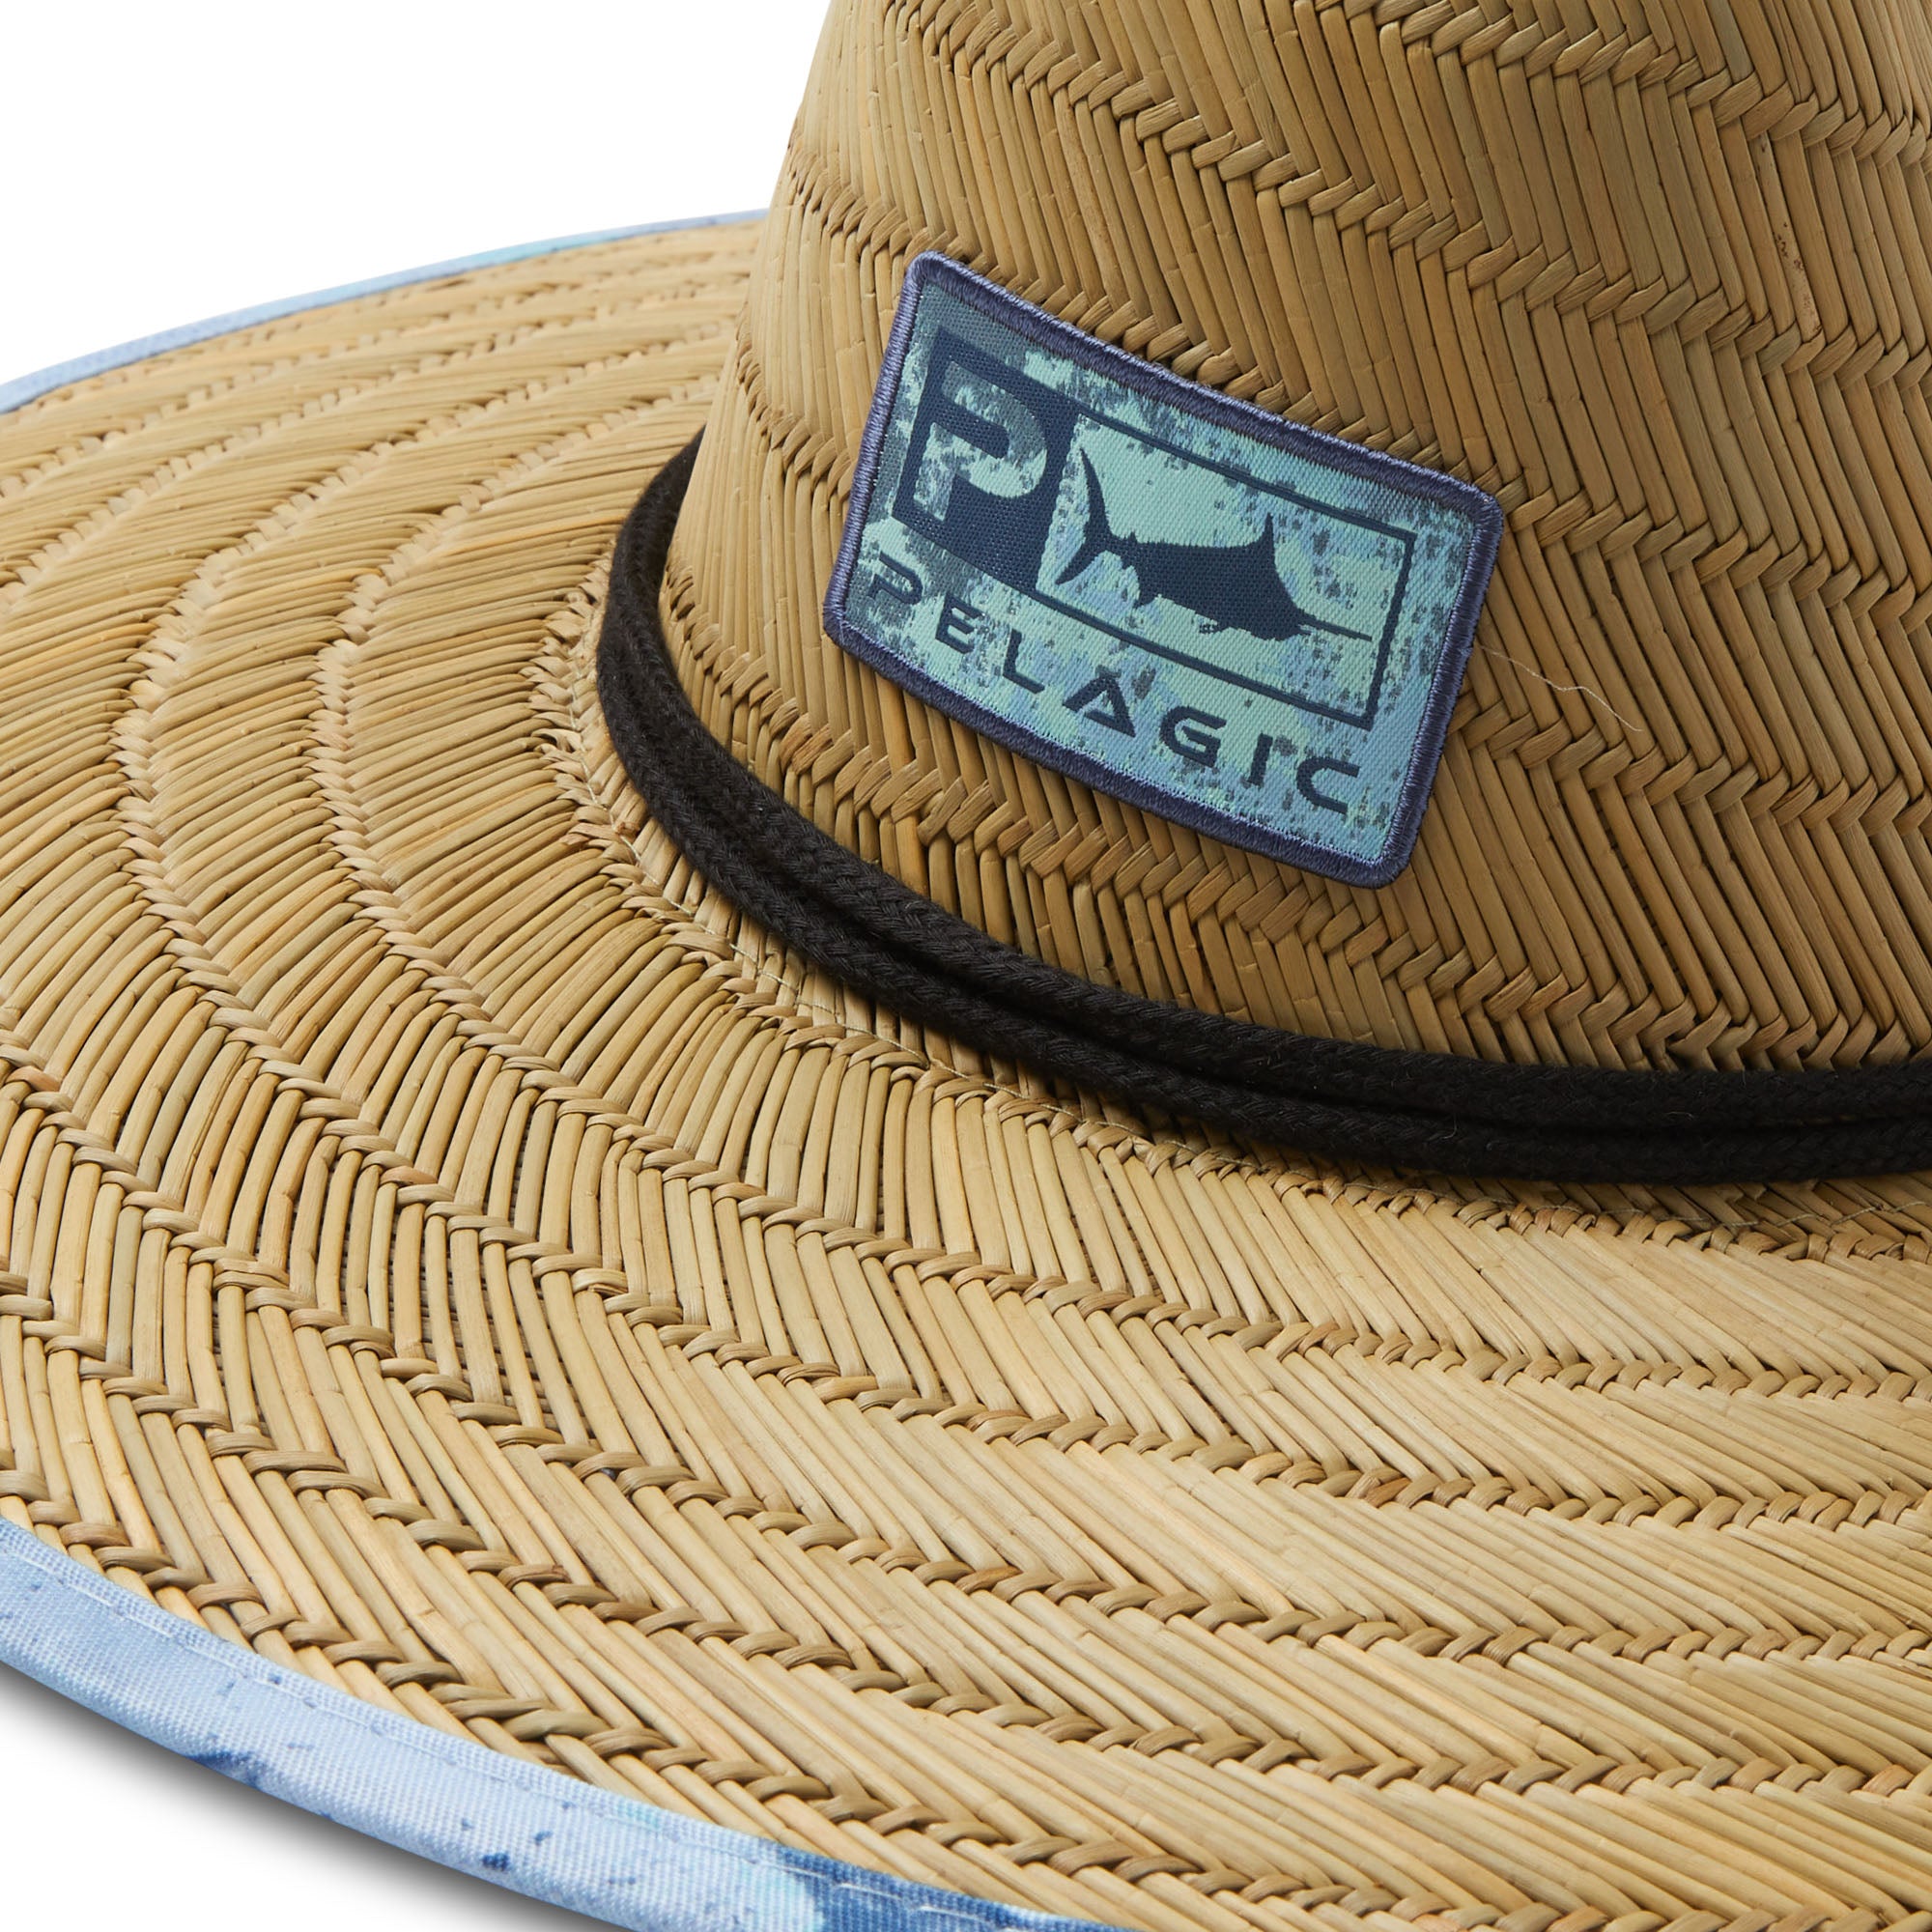 Pelagic - INTRODUCING THE NEW BAJA STRAW HAT! The perfect hat for